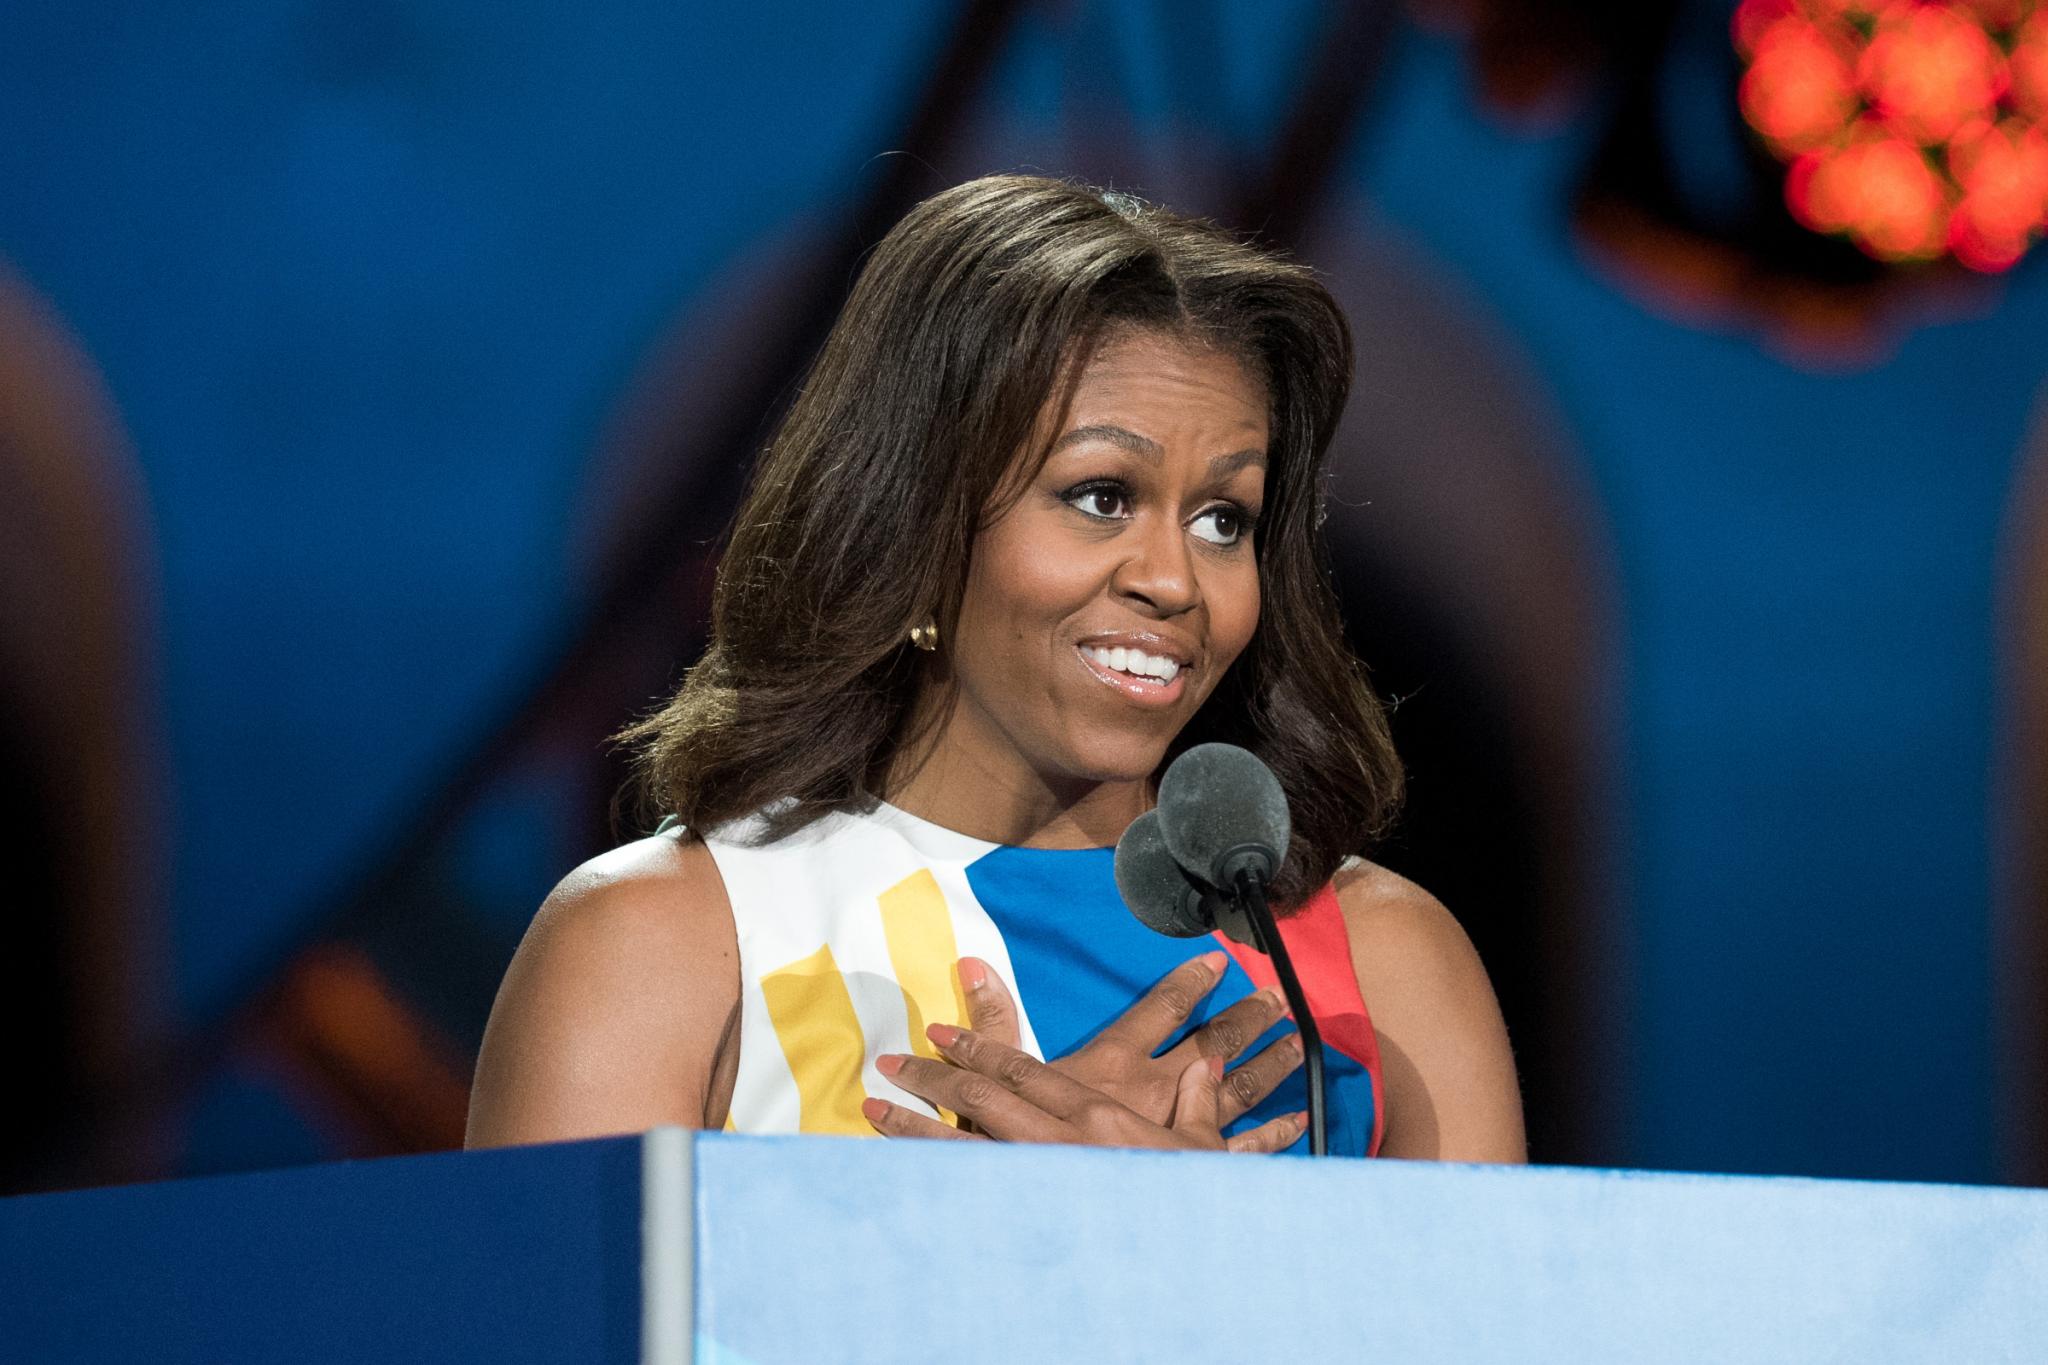 16 of Michelle Obama's Most Powerful Quotes
